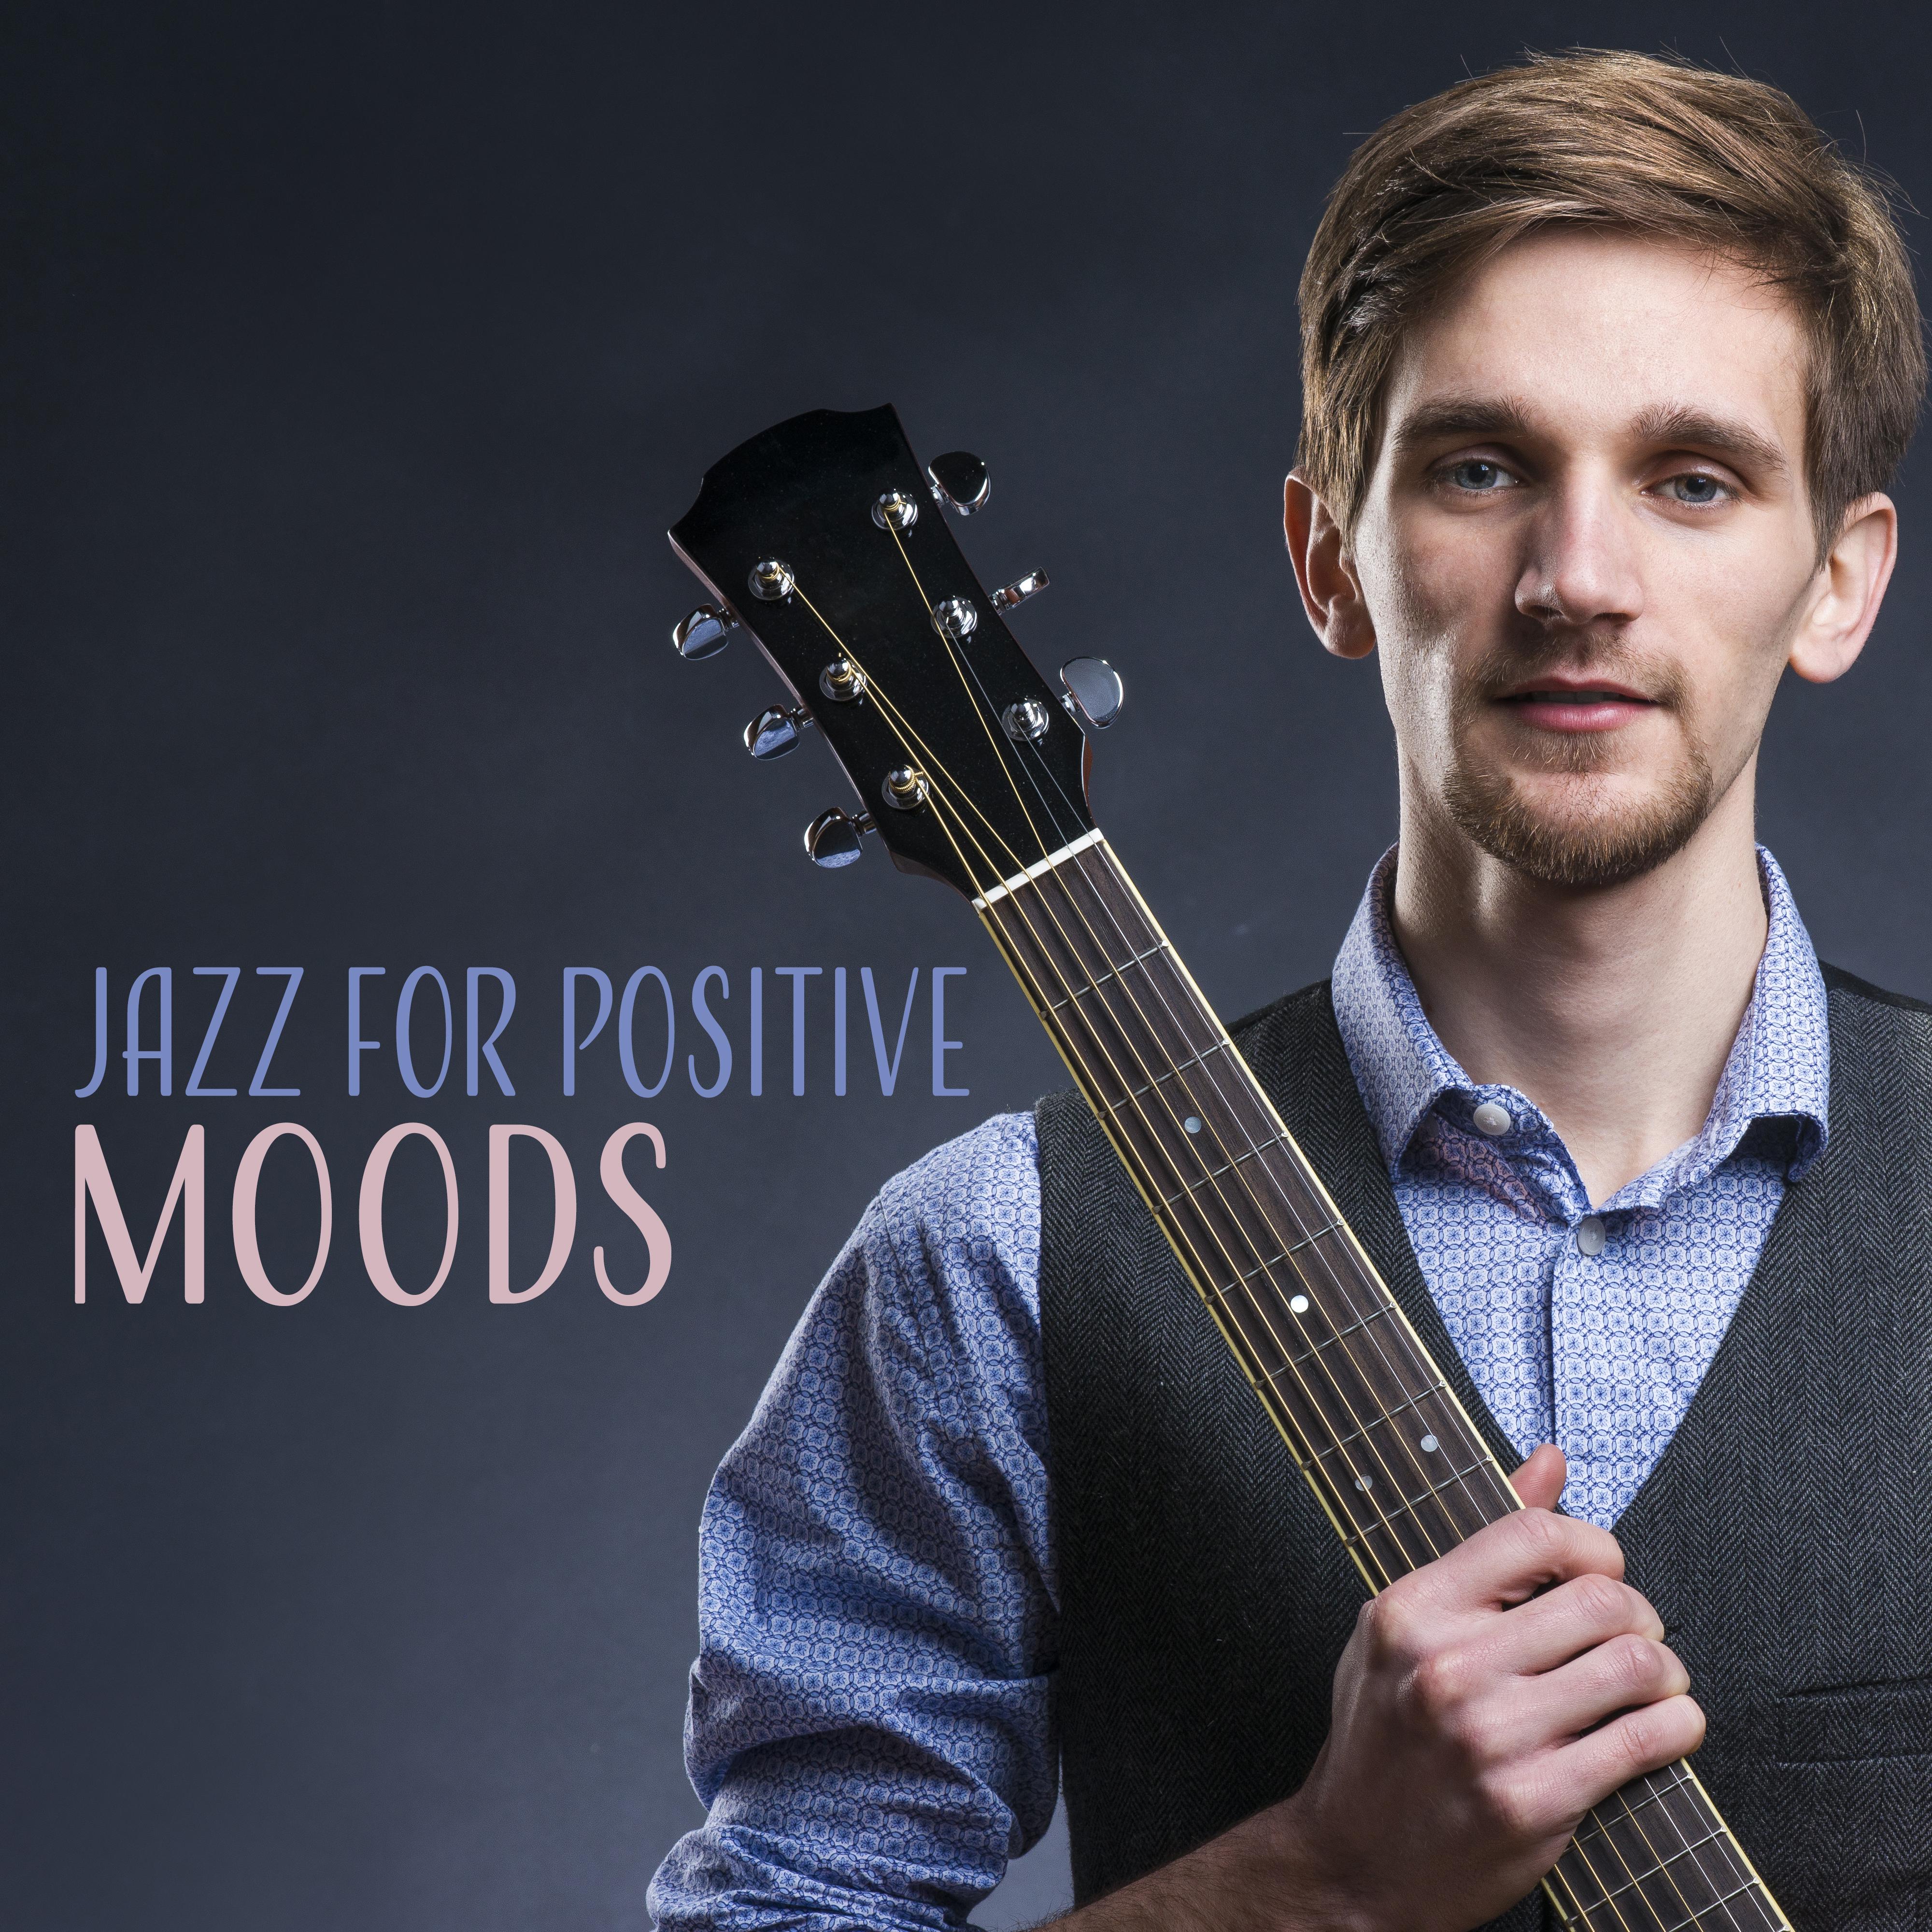 Jazz for Positive Moods